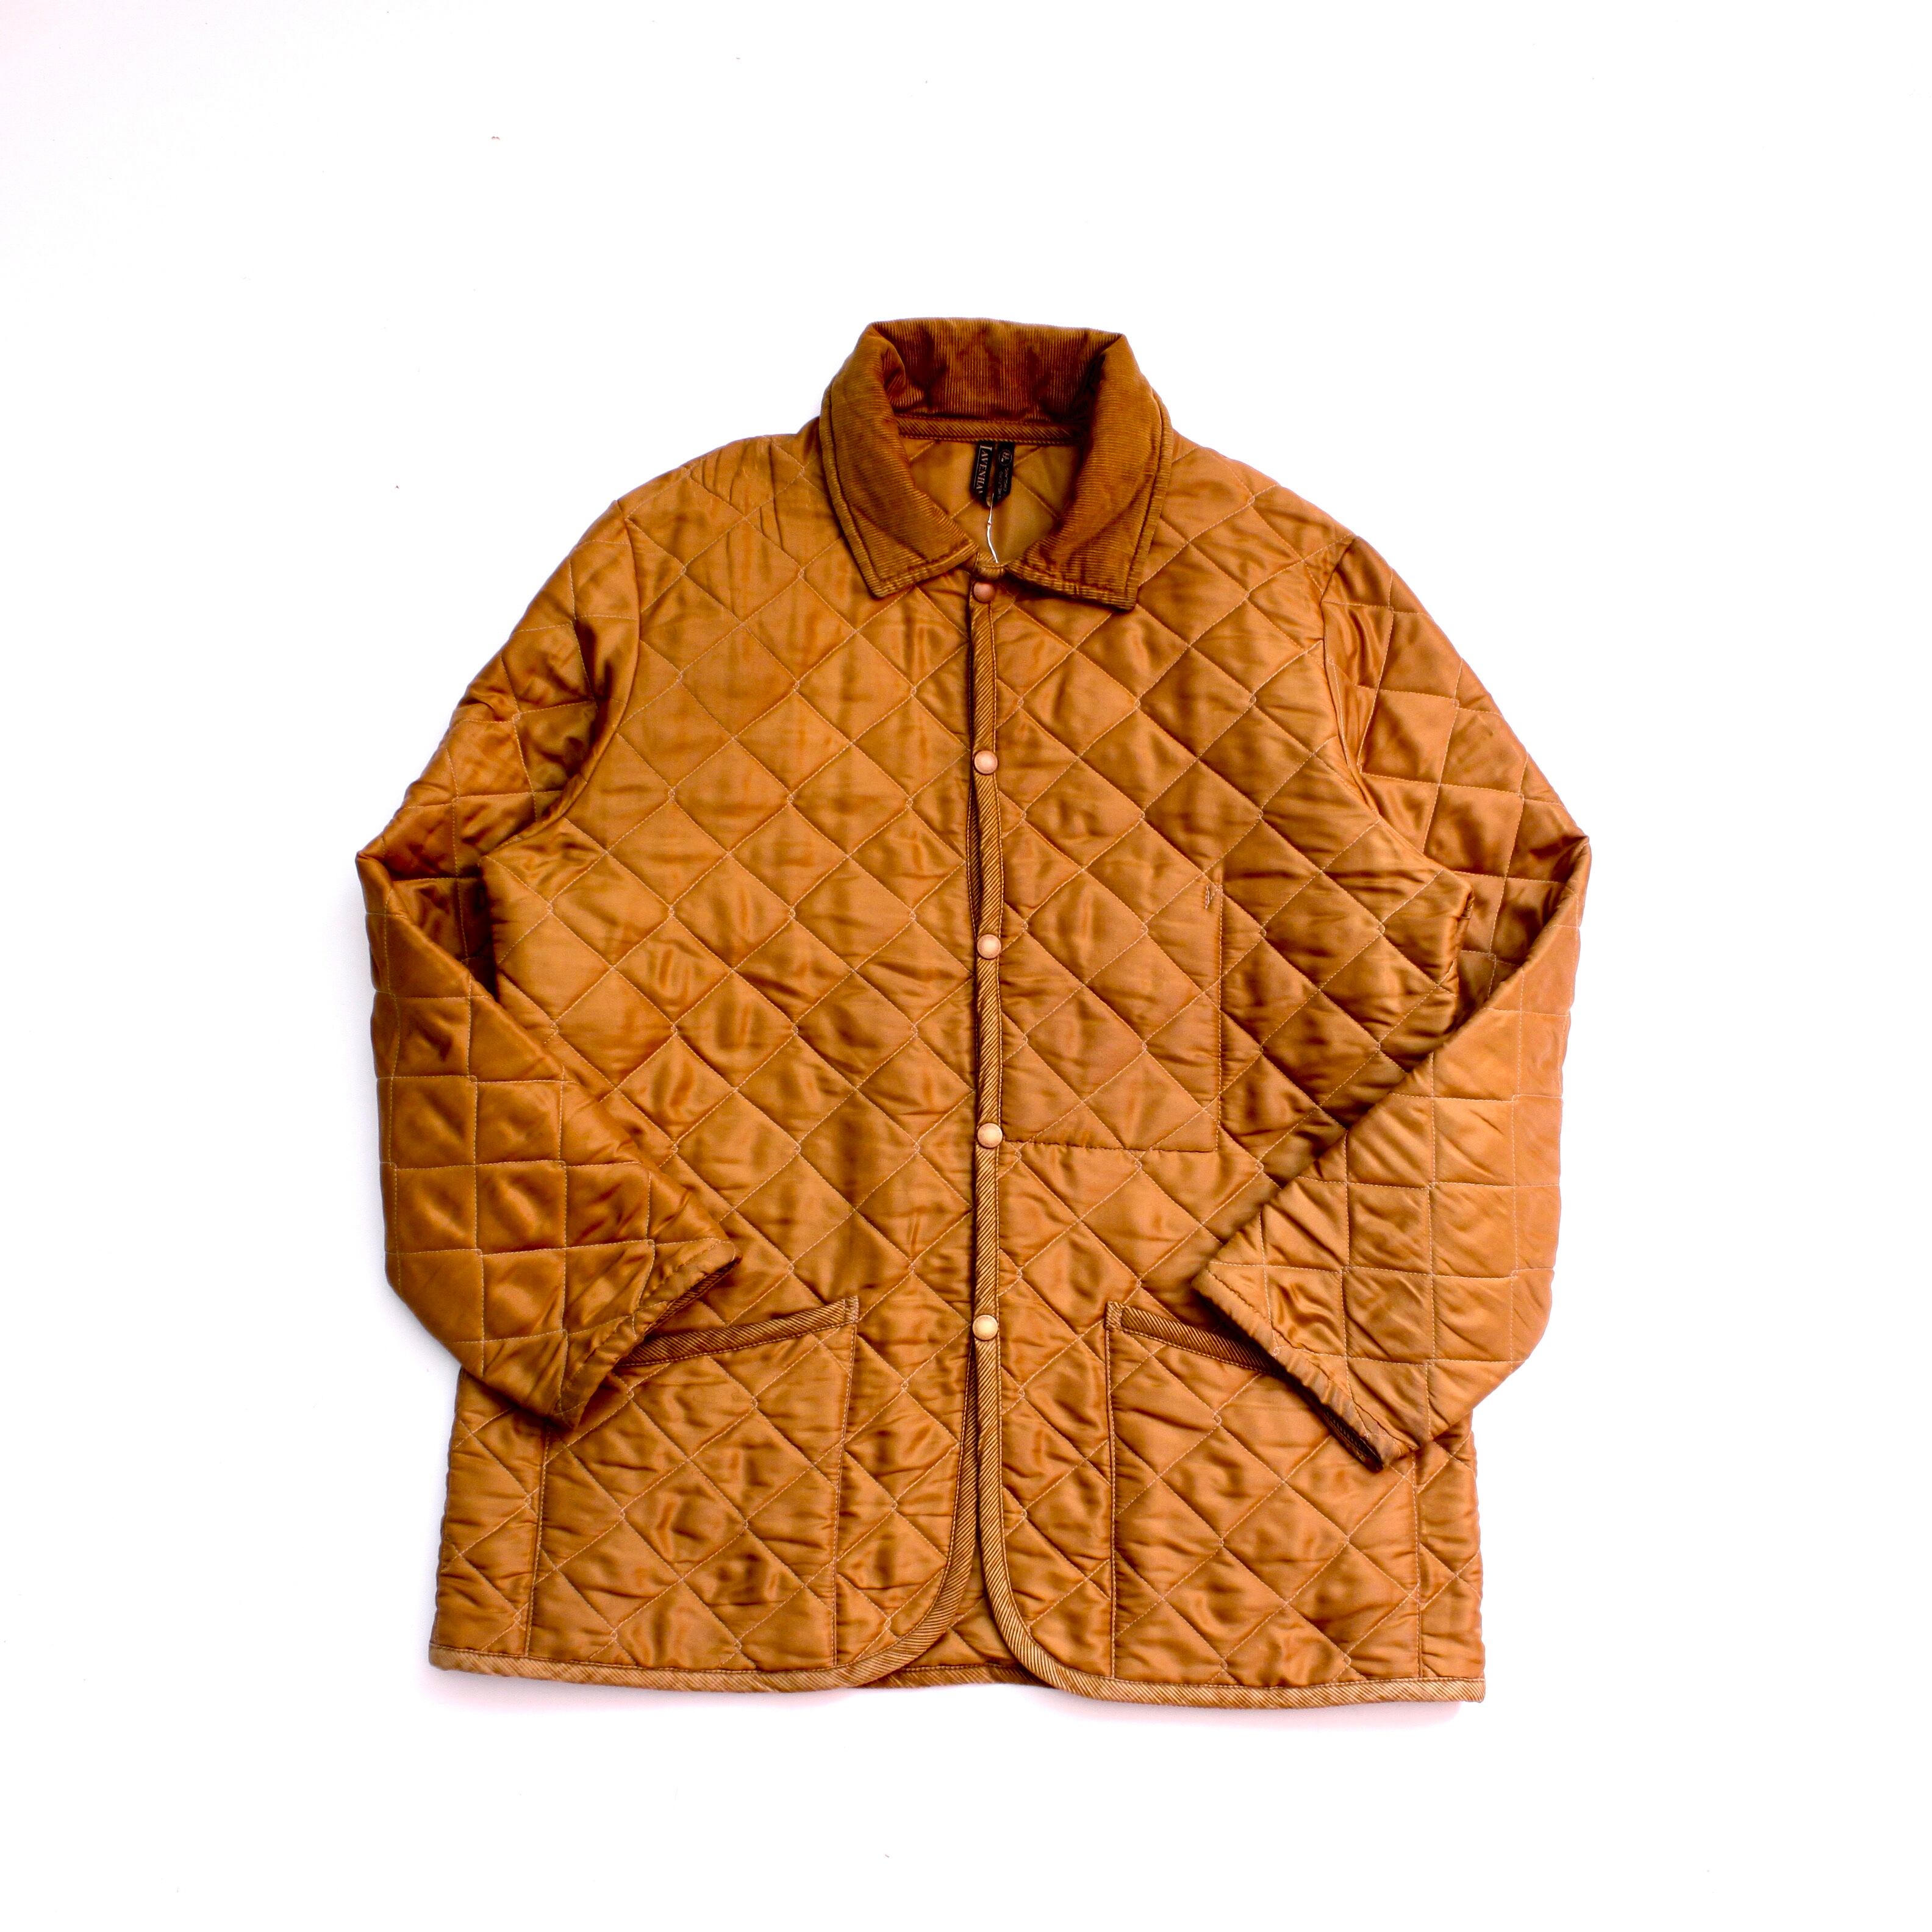 0700. 1990's LAVENHAM Quilting jacket Made in ENGLAND gold 90s 90